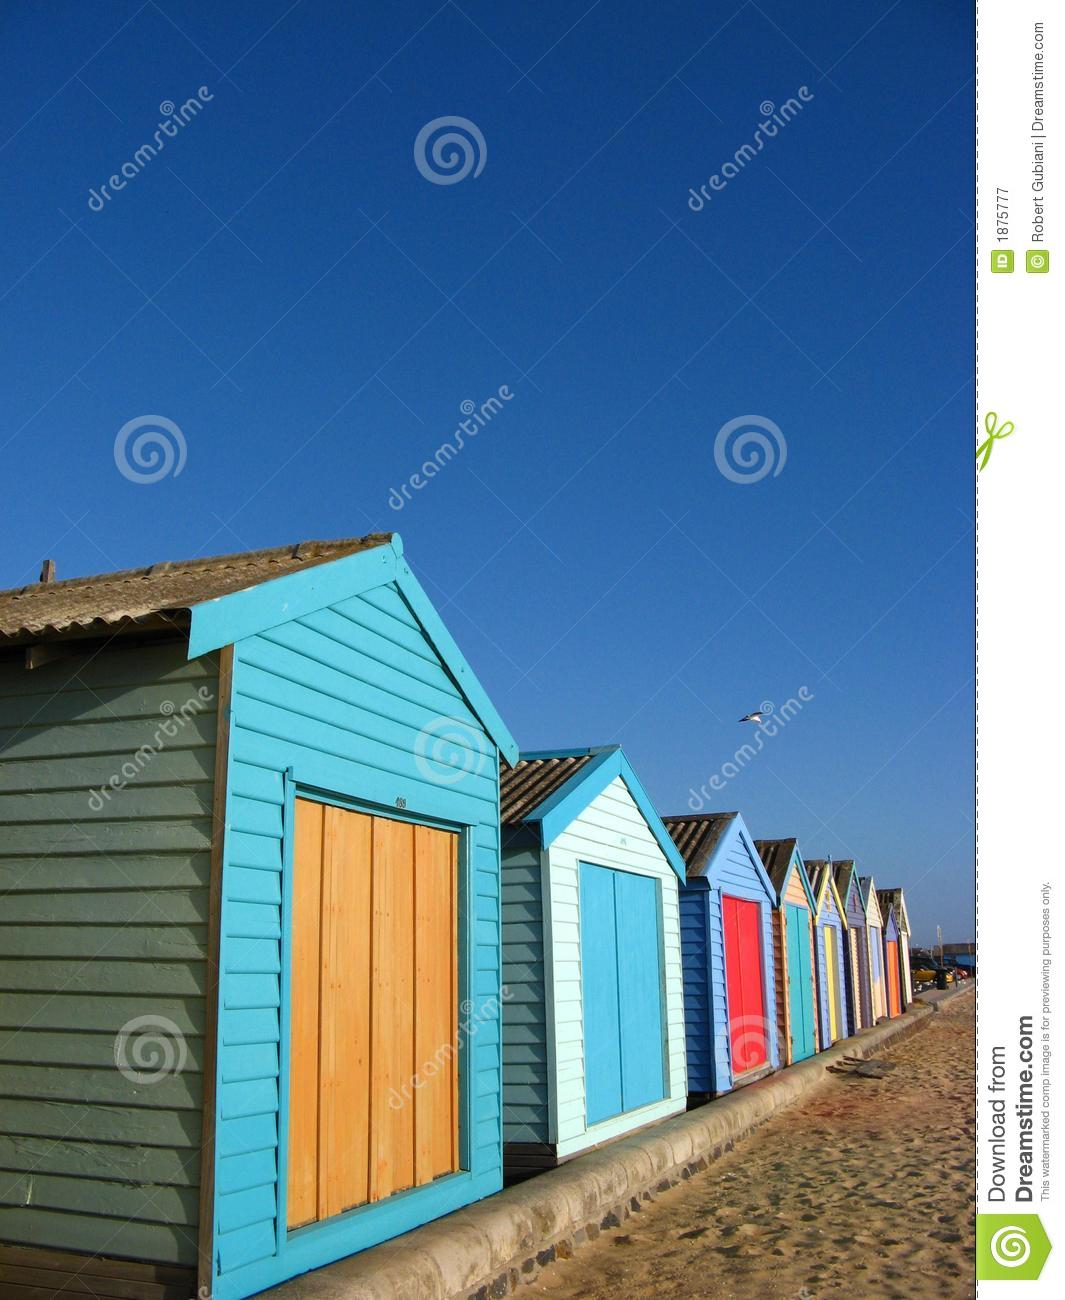 Storage Sheds On The Beach Stock Image Image Of Wooden 1875777 inside size 1065 X 1300